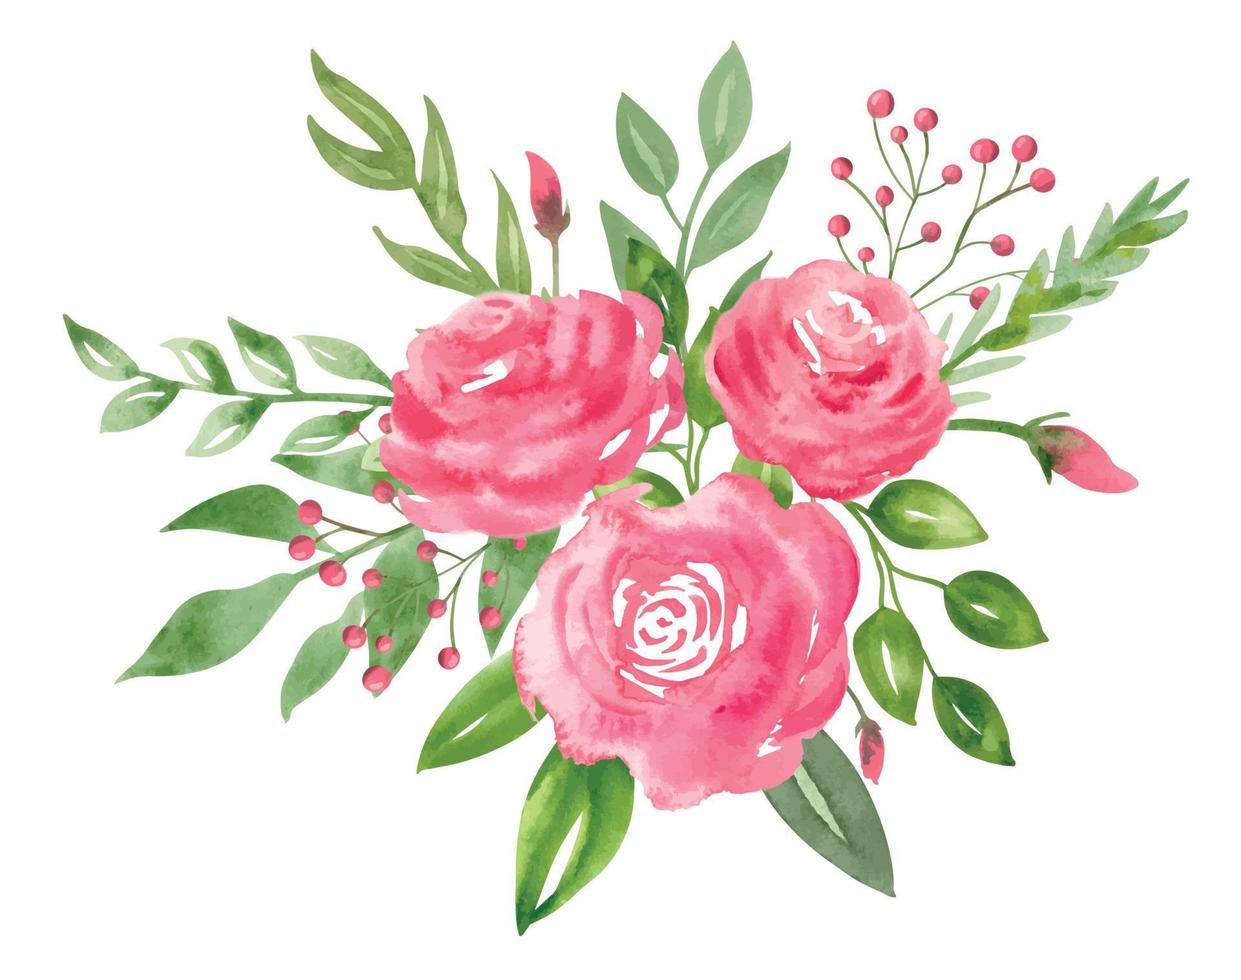 Watercolor abstract Bouquet with Pink Roses and green leaves. Hand drawn floral illustration for greeting cards or invitations on isolated background in vintage style. Botanical decorative composition vector